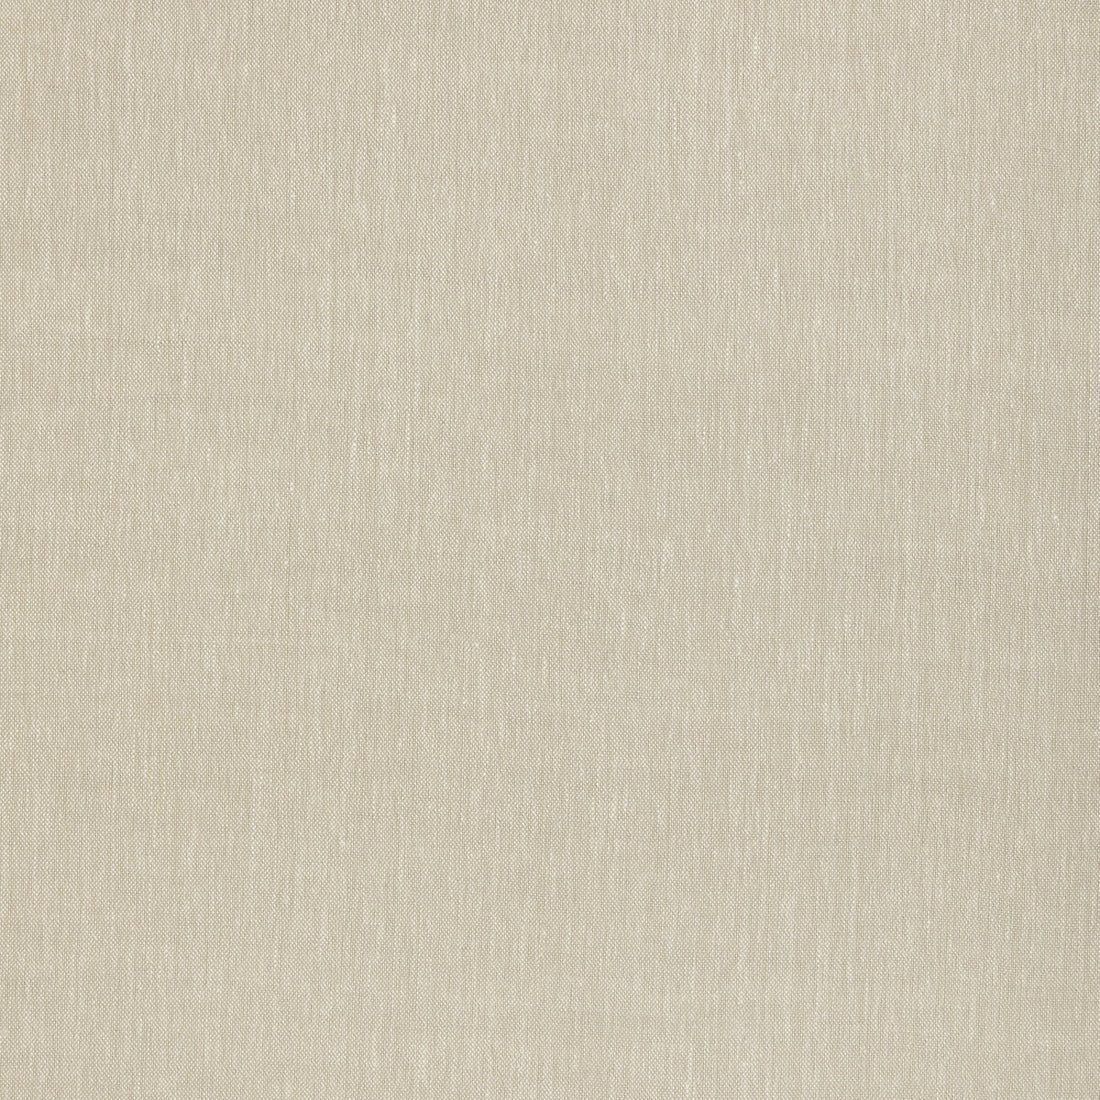 Marl fabric in parchment color - pattern ED85393.225.0 - by Threads in the Quintessential Naturals collection